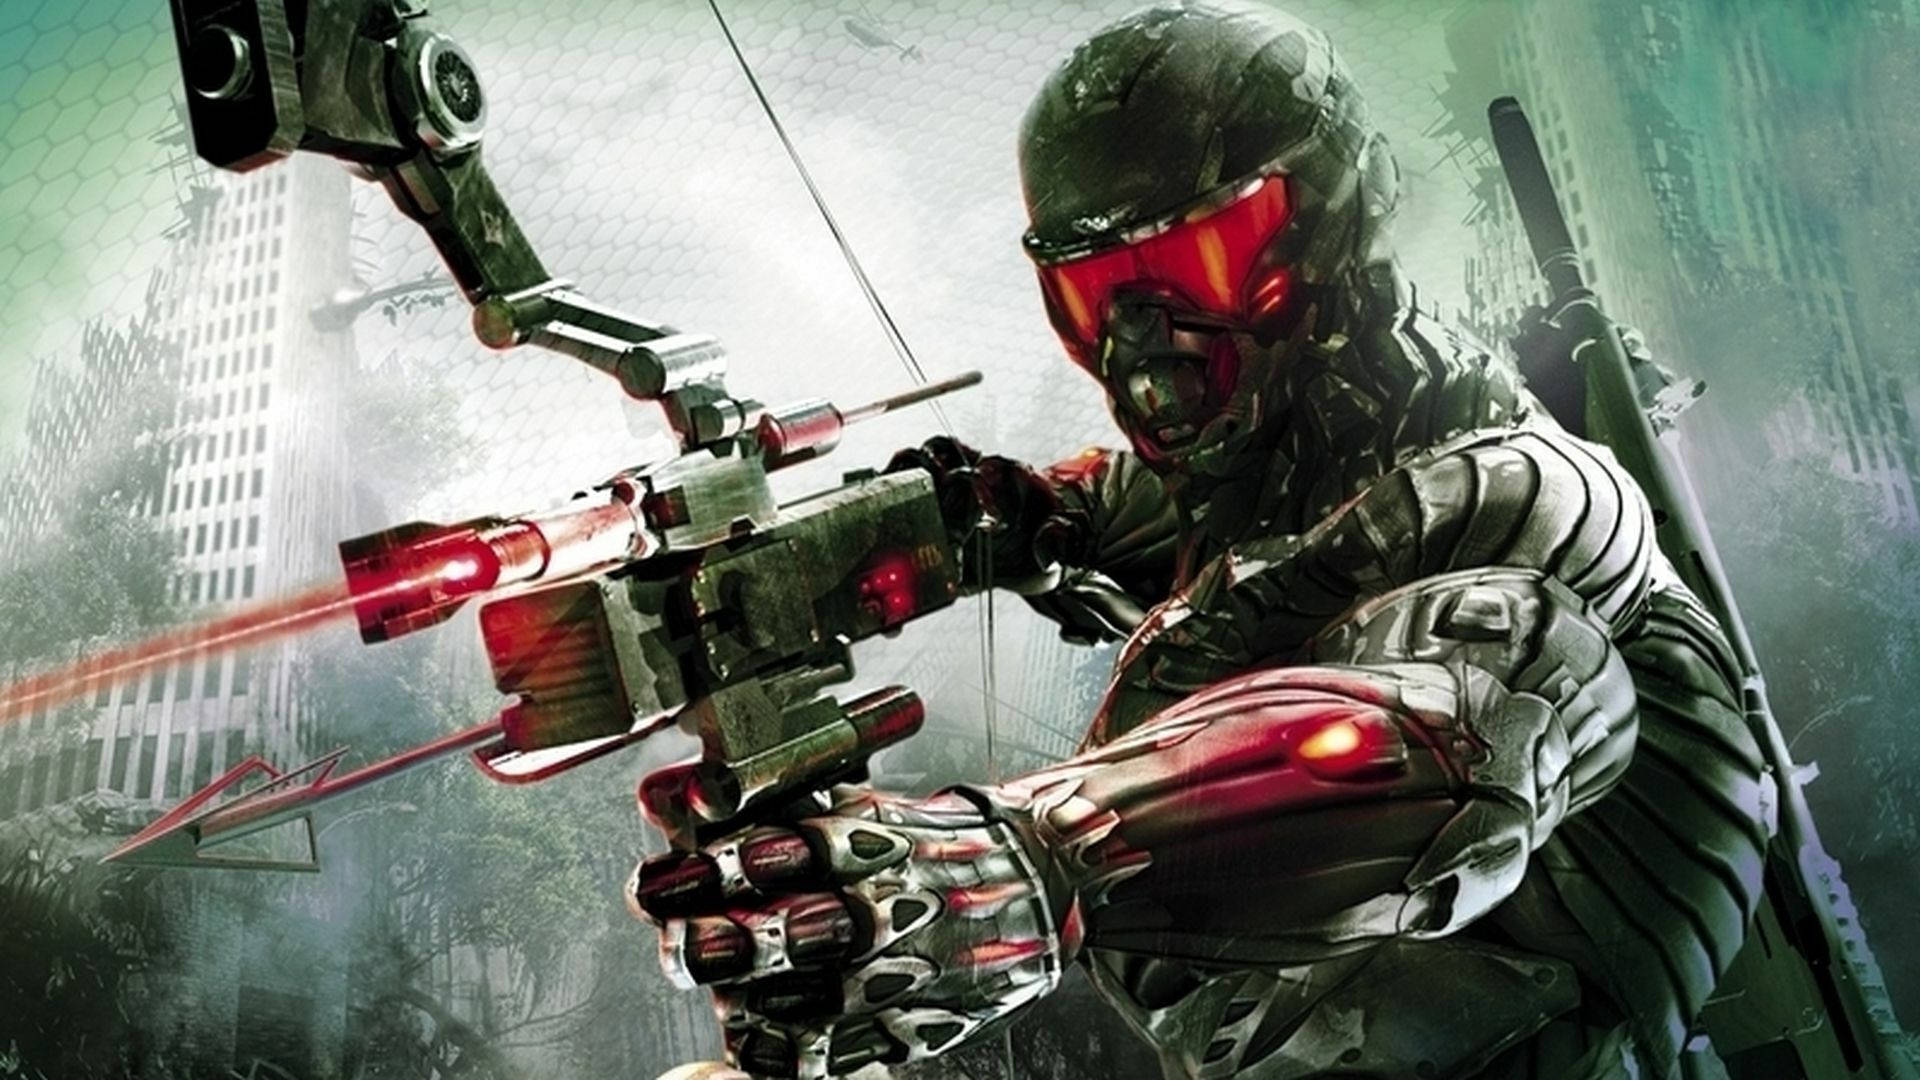 "Experience the Action in Crysis Remastered." Wallpaper